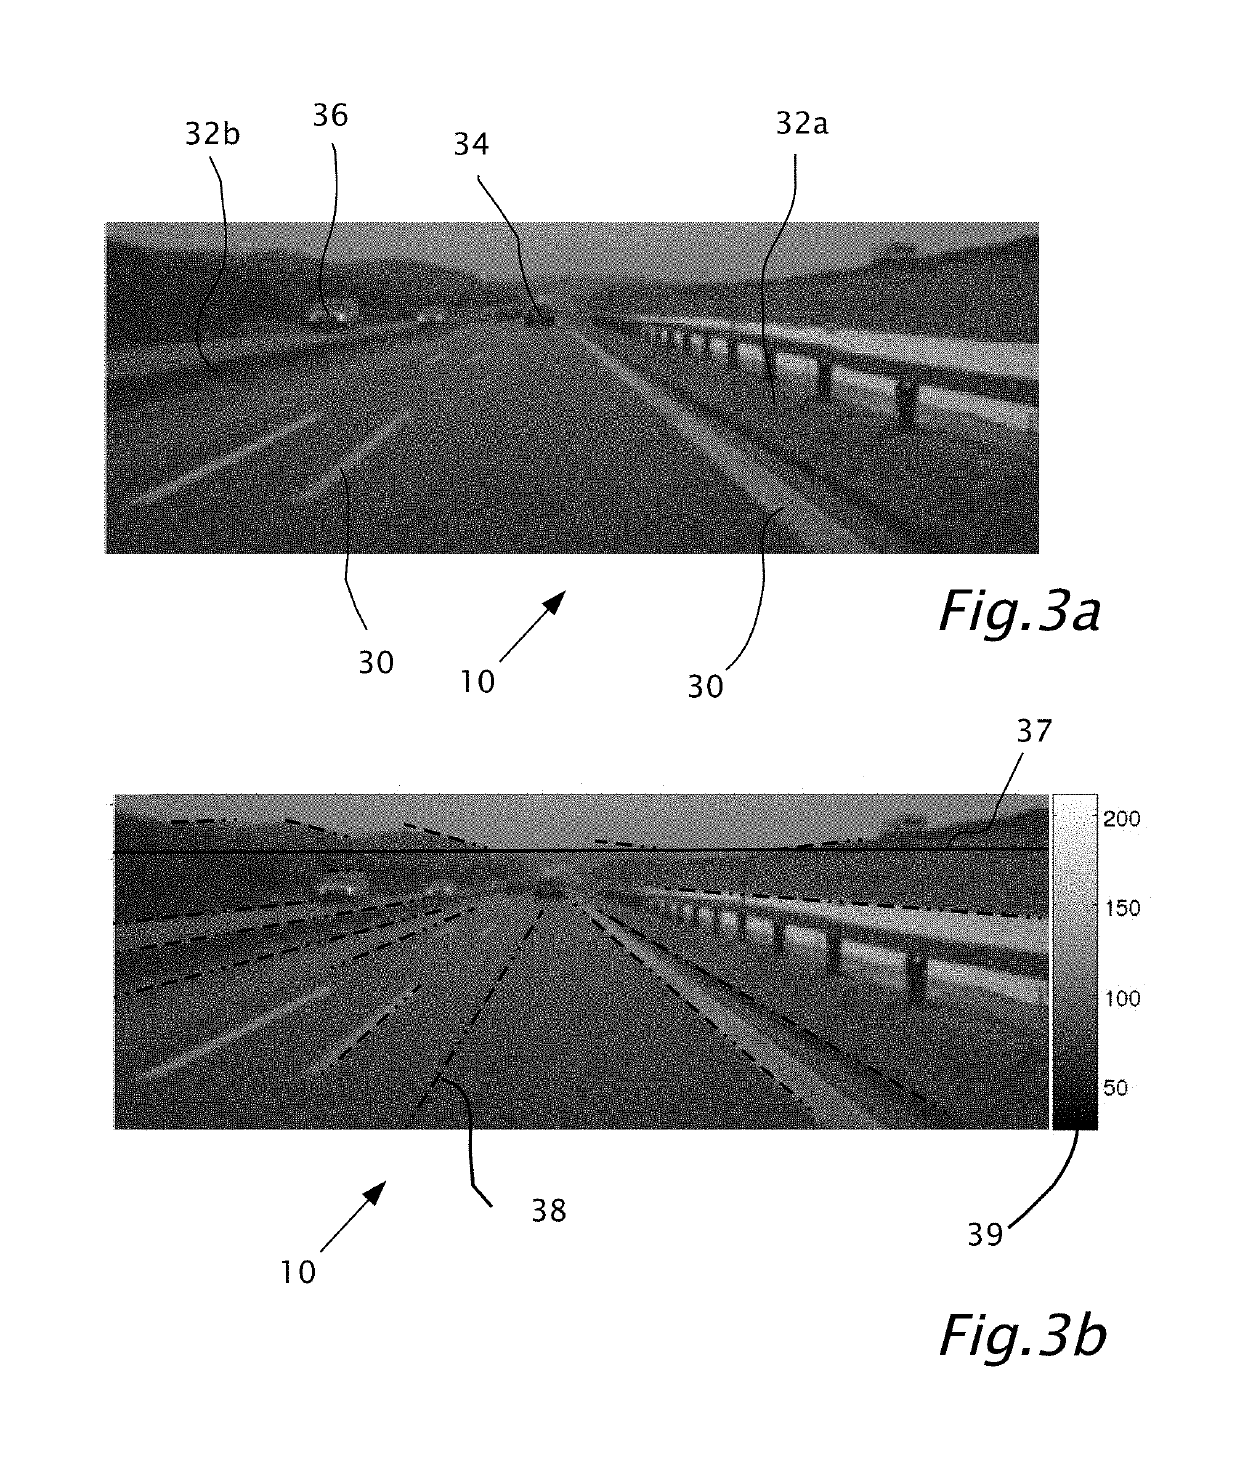 Monocular cued detection of three-dimensional structures from depth images